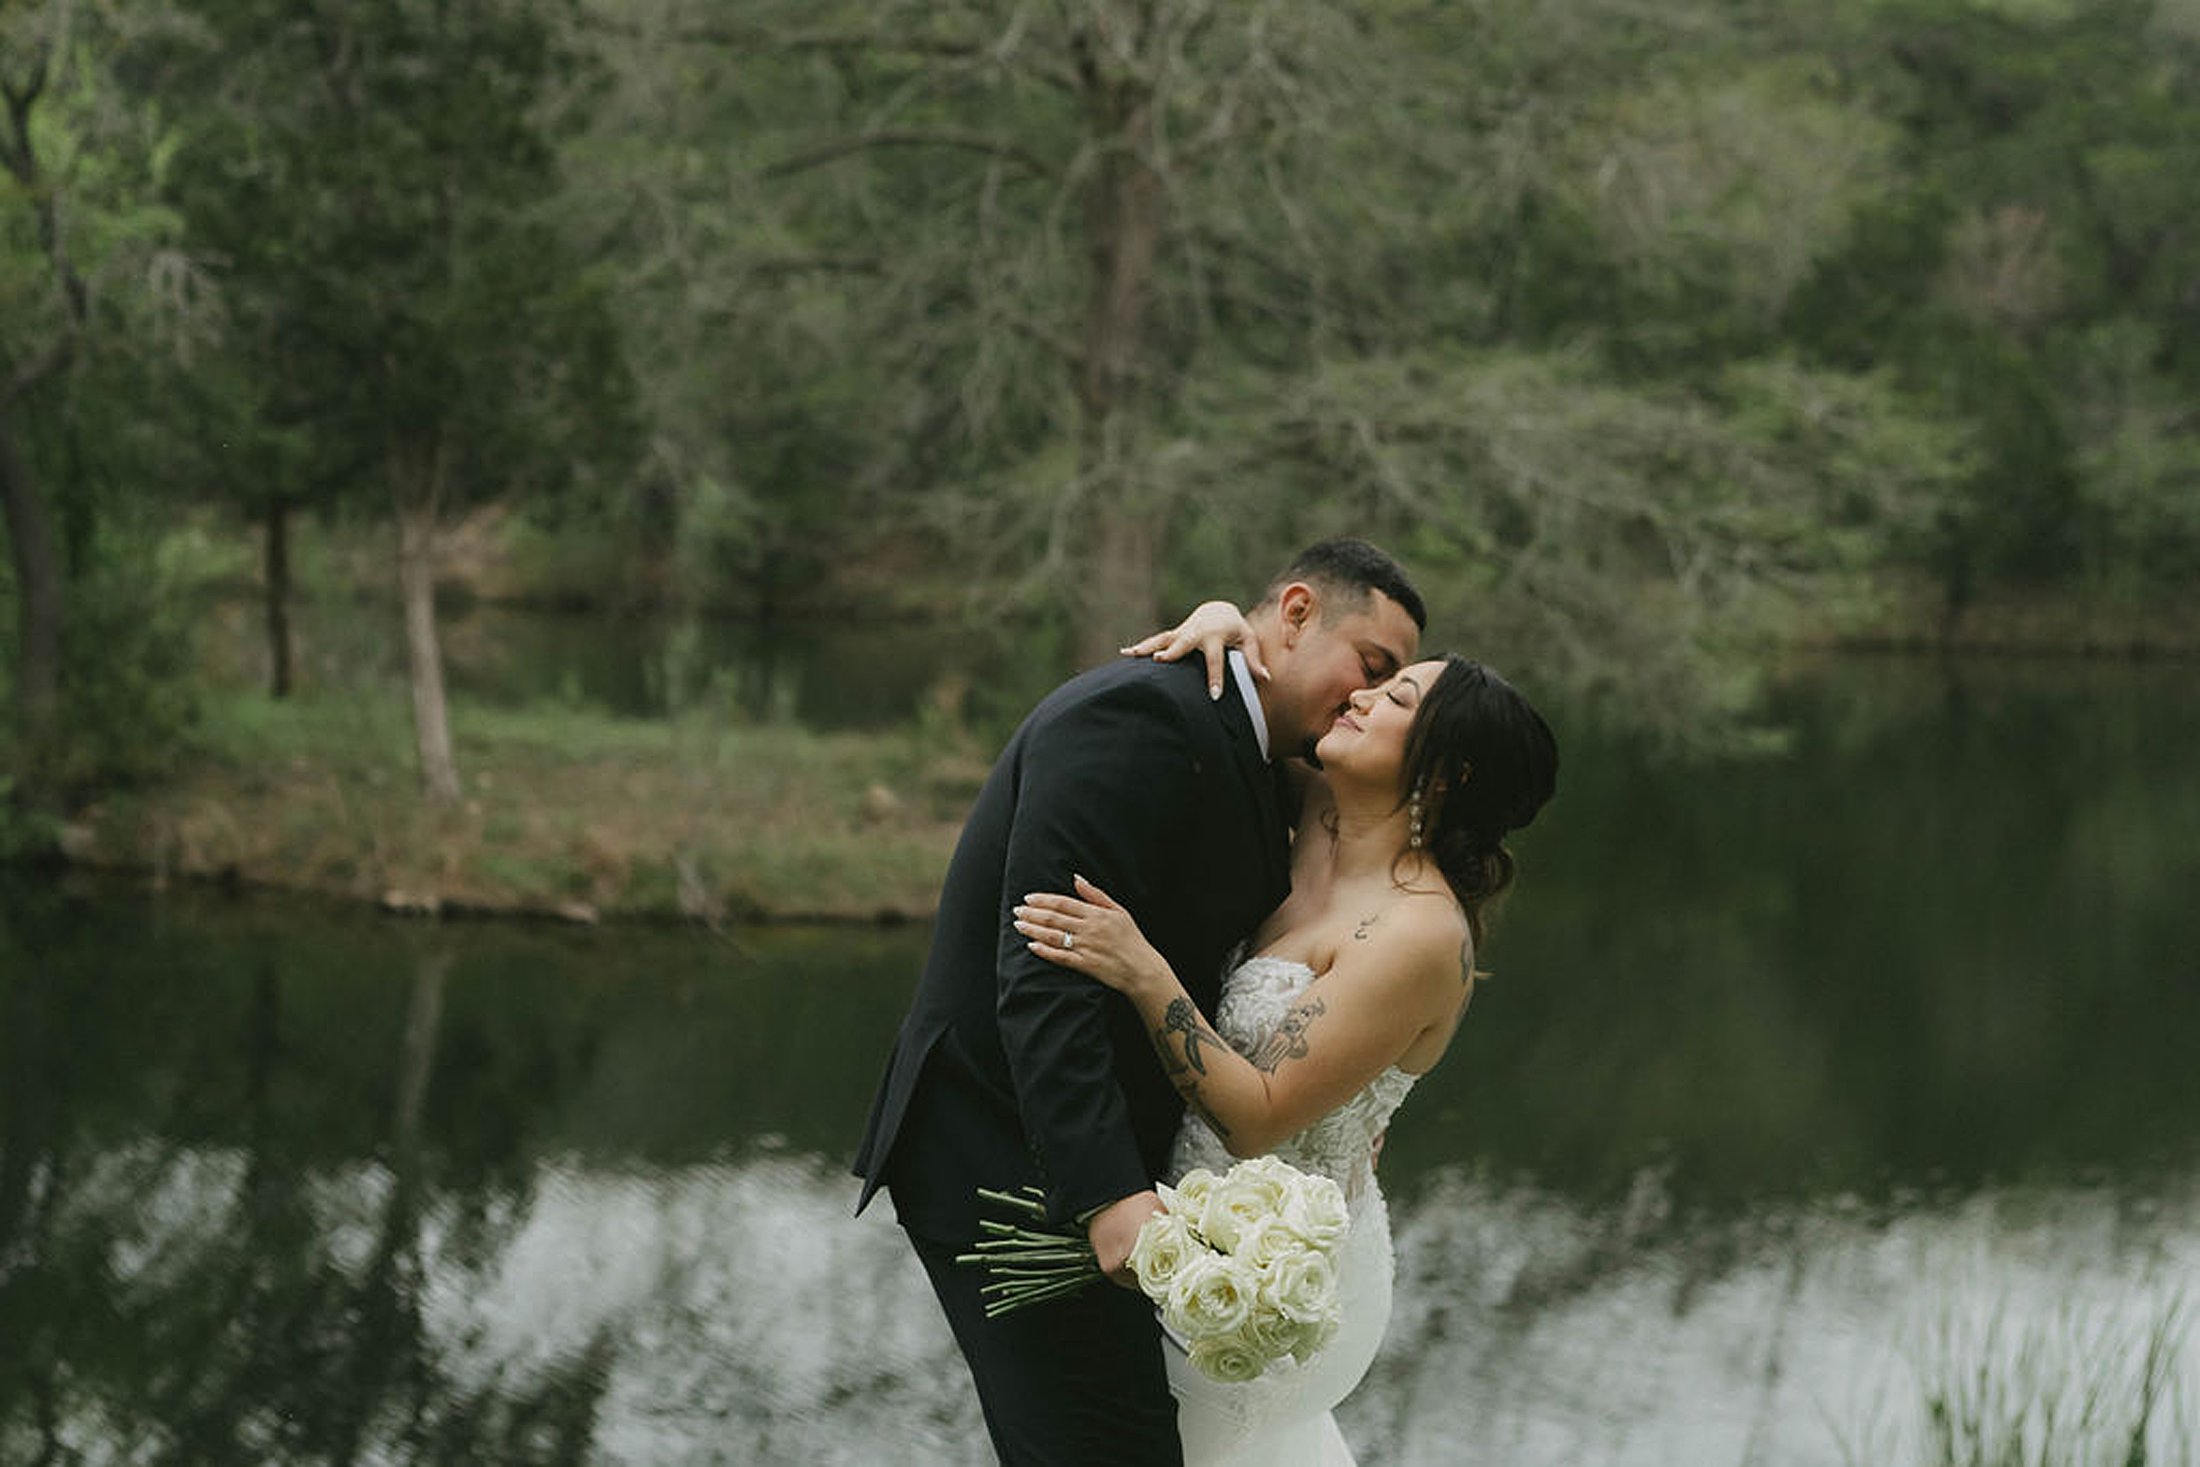 A couple embracing near a serene lake at The Preserve at Canyon Lake, with the woman in a white strapless dress holding a bouquet of white roses and the man in a black suit. Trees are visible in the background.